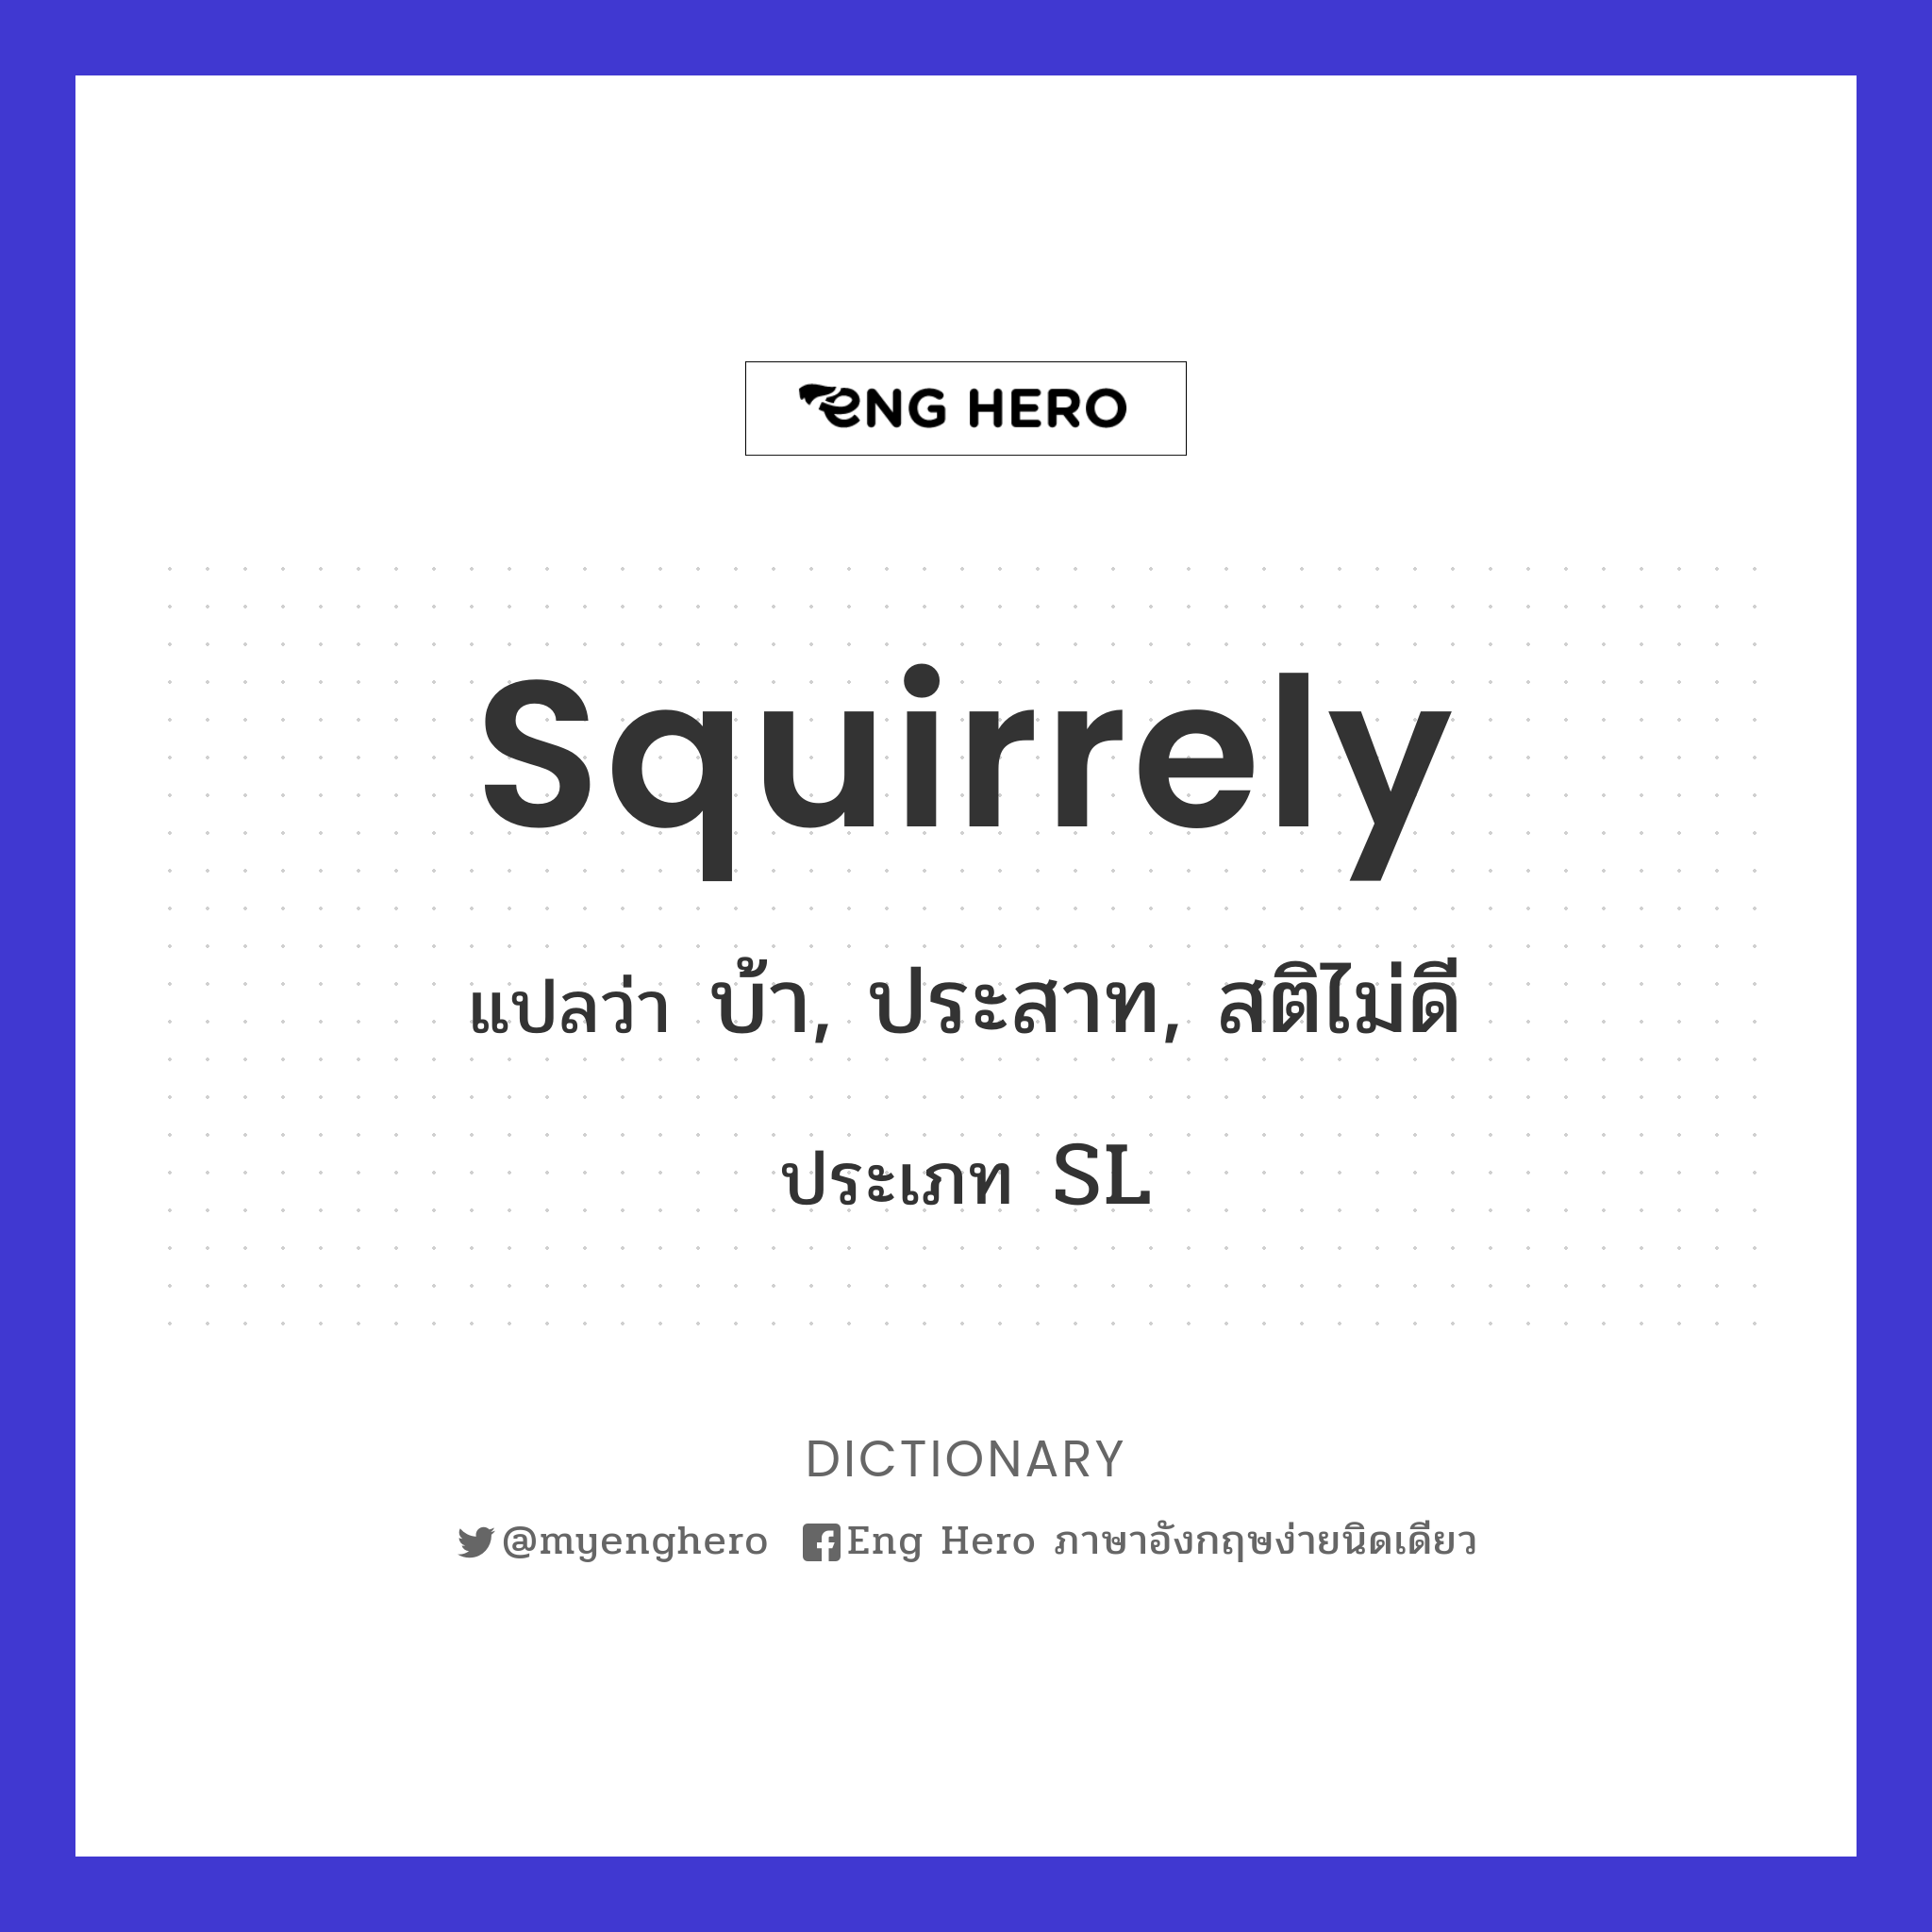 squirrely